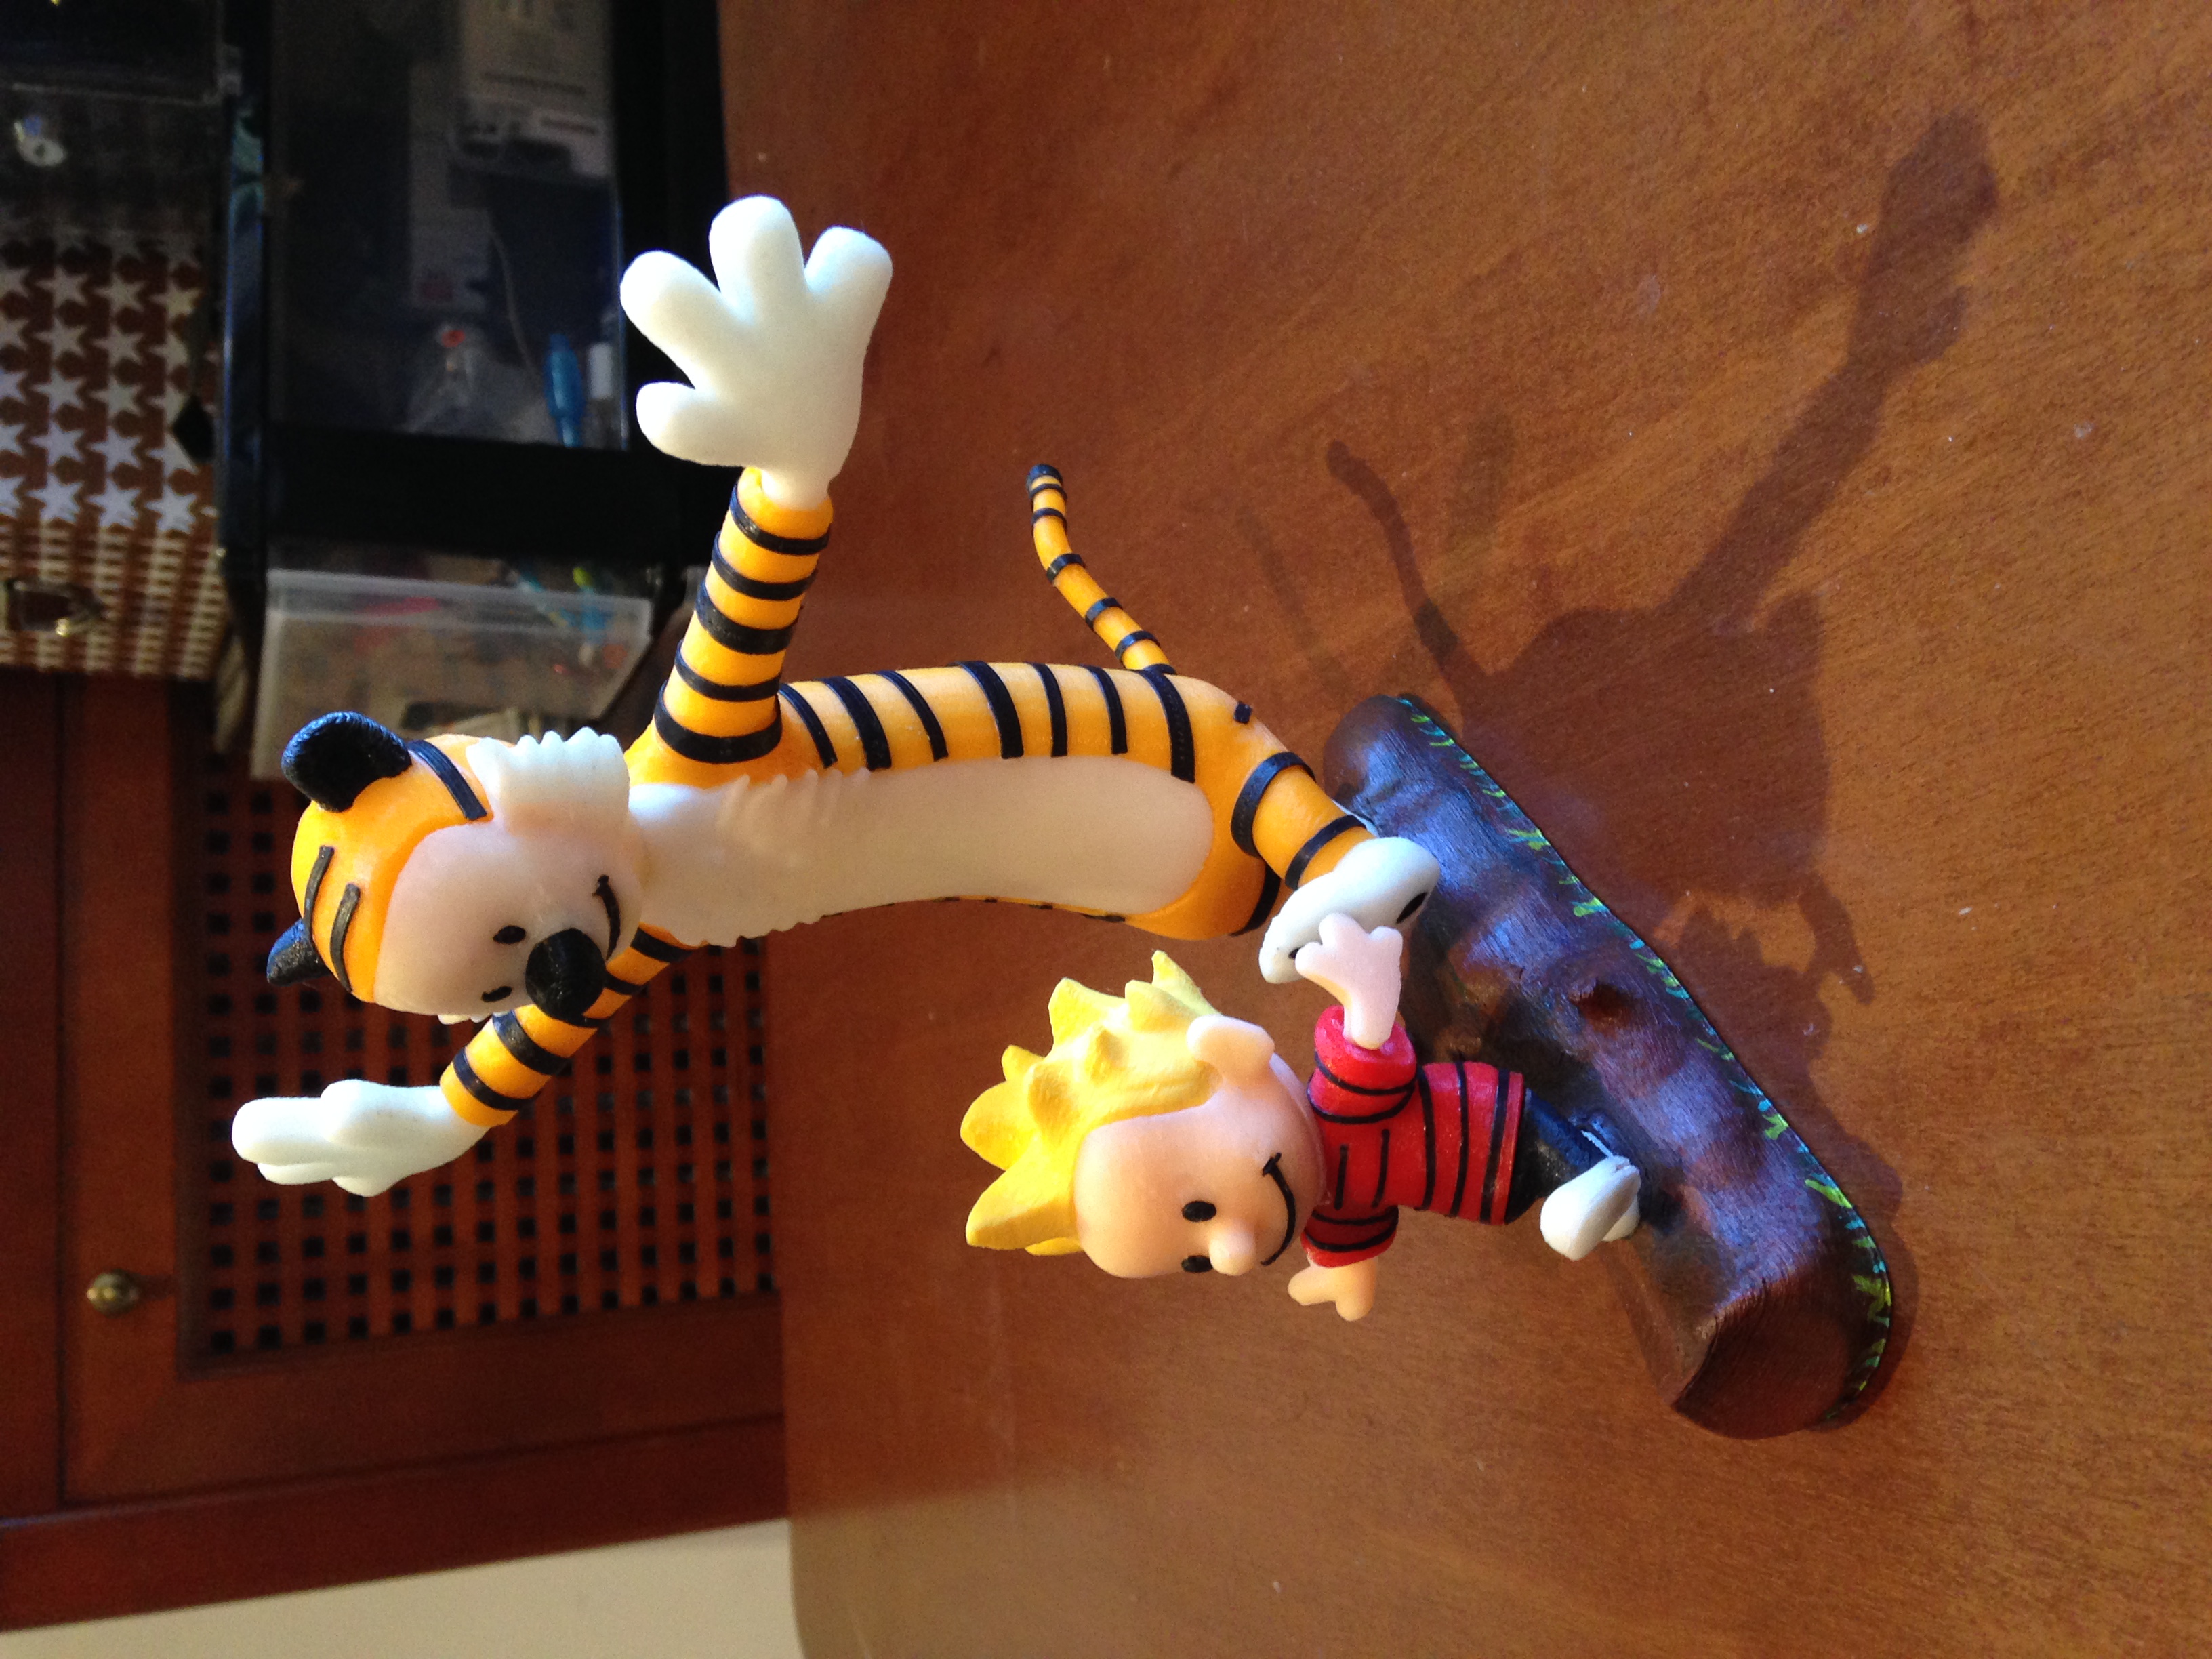 calvin and hobbes action figures